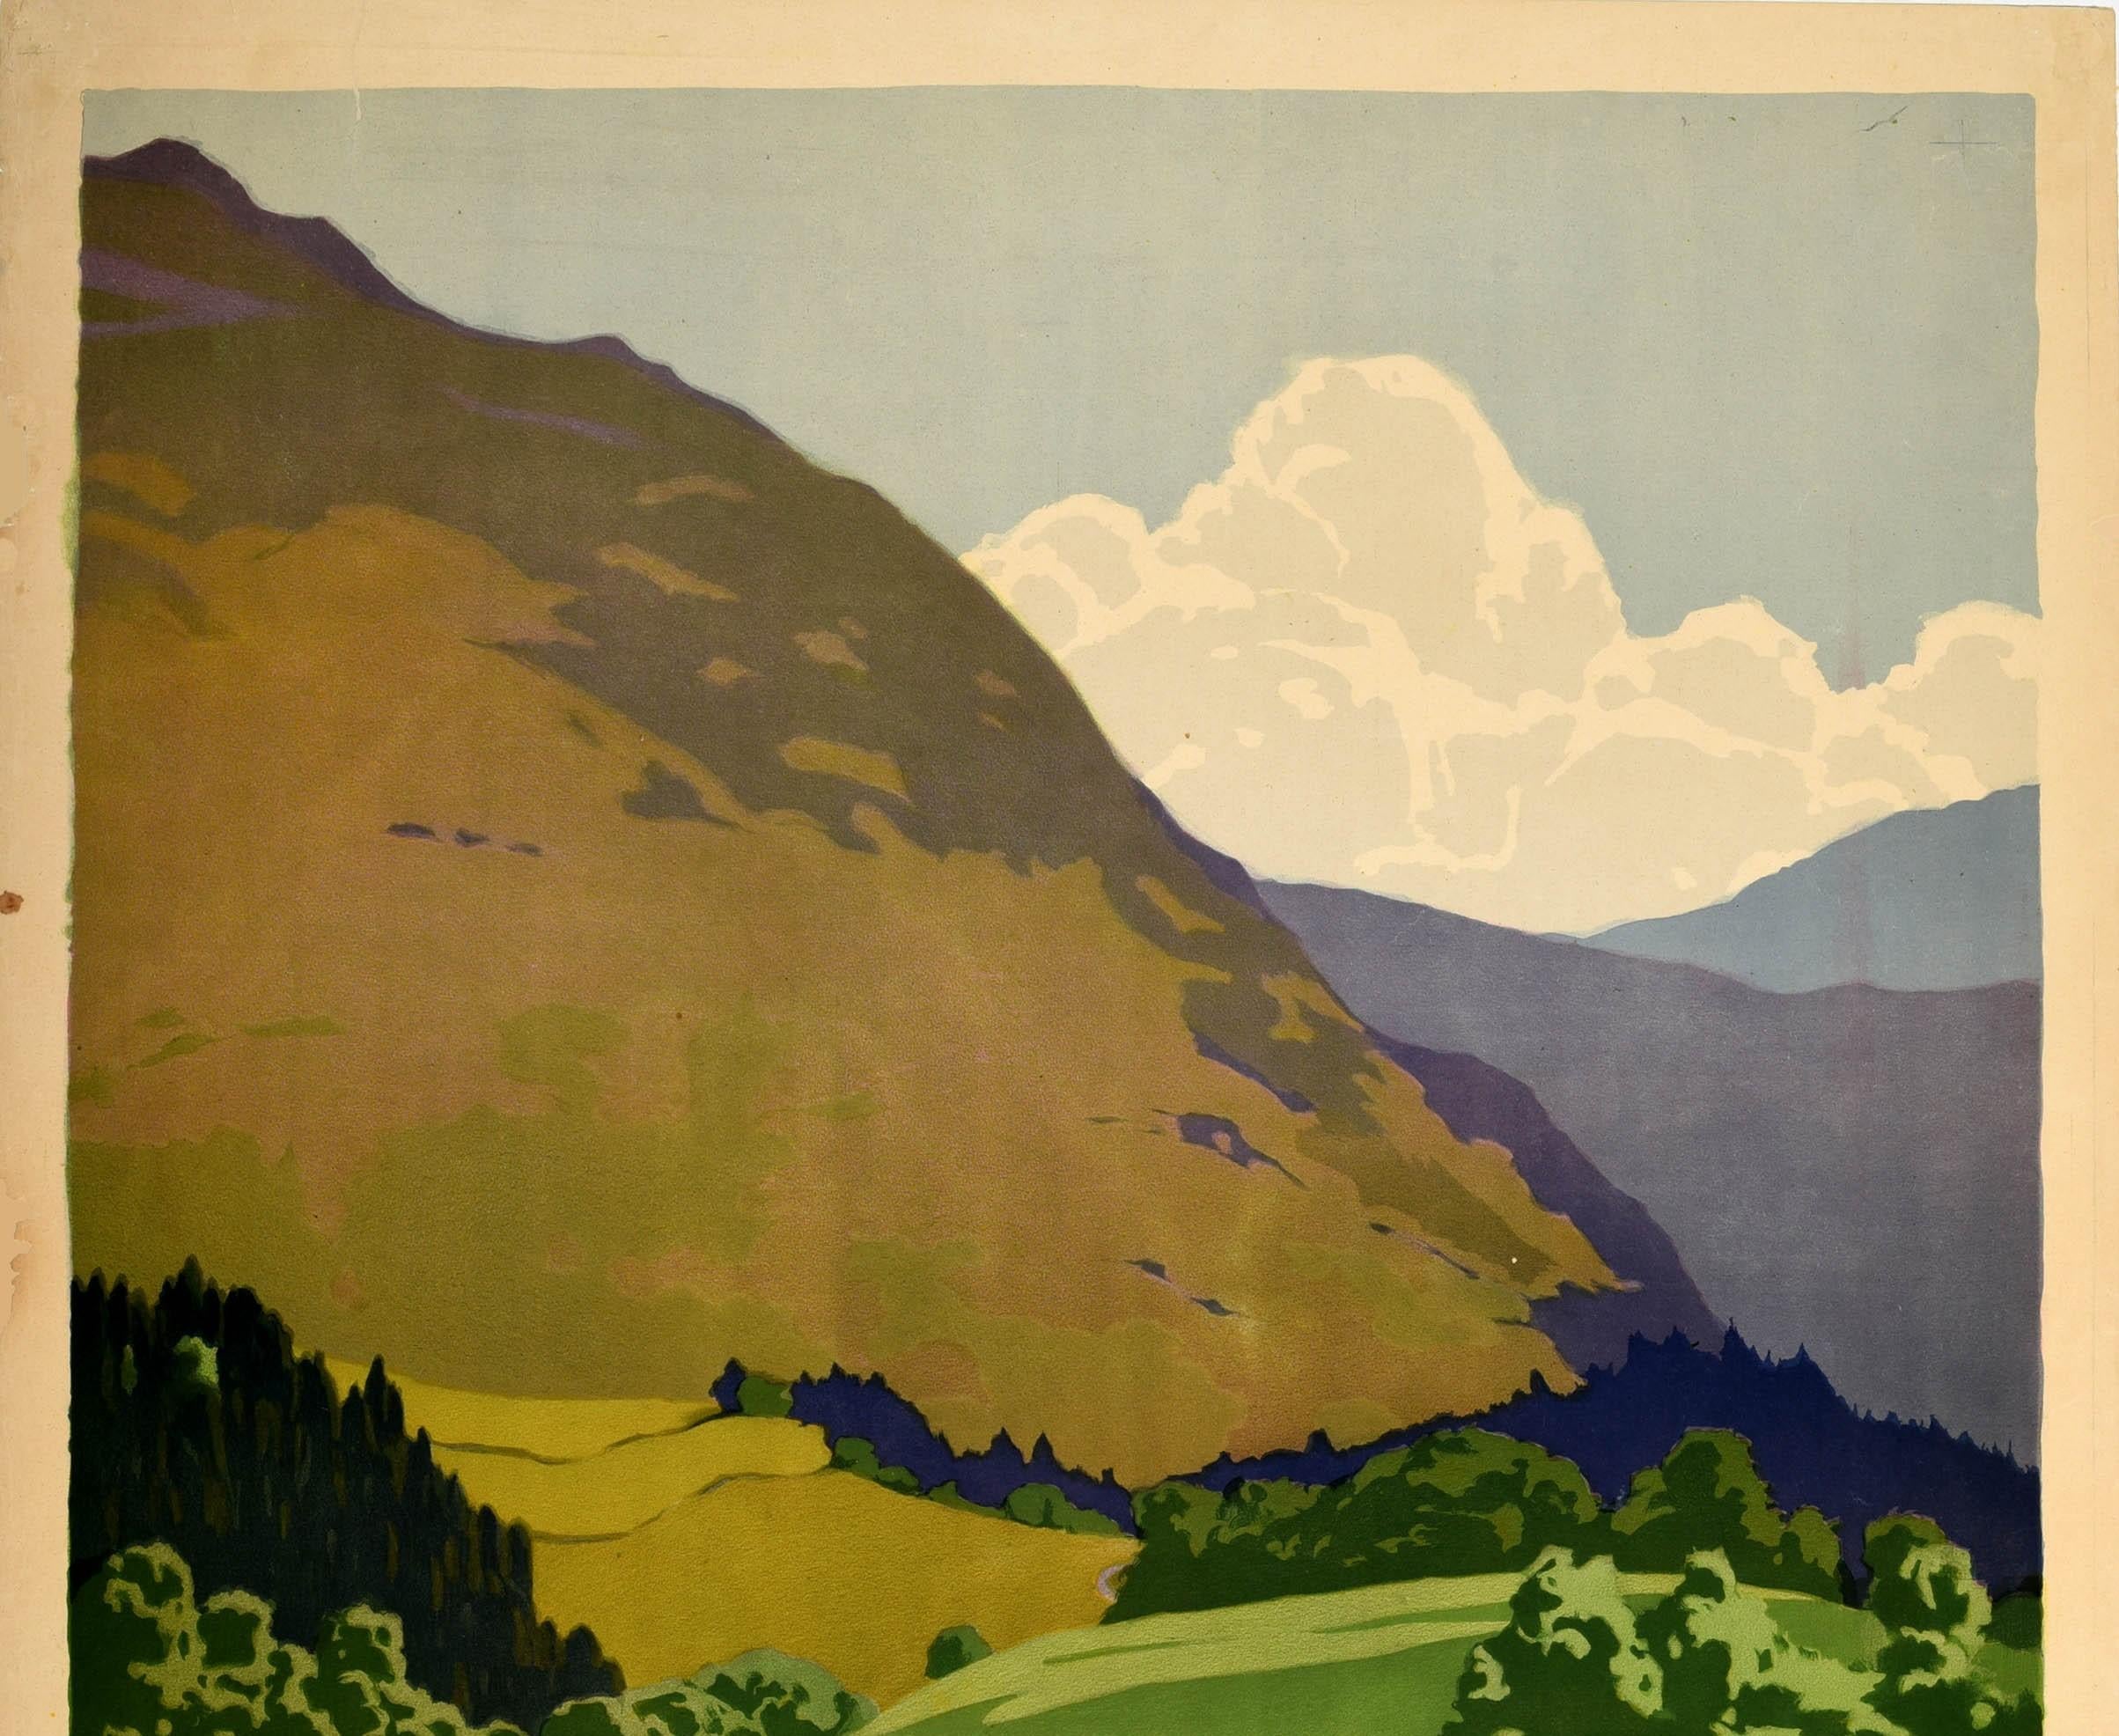 Original vintage LMS London Midland and Scottish Railway travel poster - The Lake District For Holidays - featuring a scenic view of Grasmere by the notable British artist and illustrator Norman Wilkinson (1878-1971) of people in a rowing boat on a